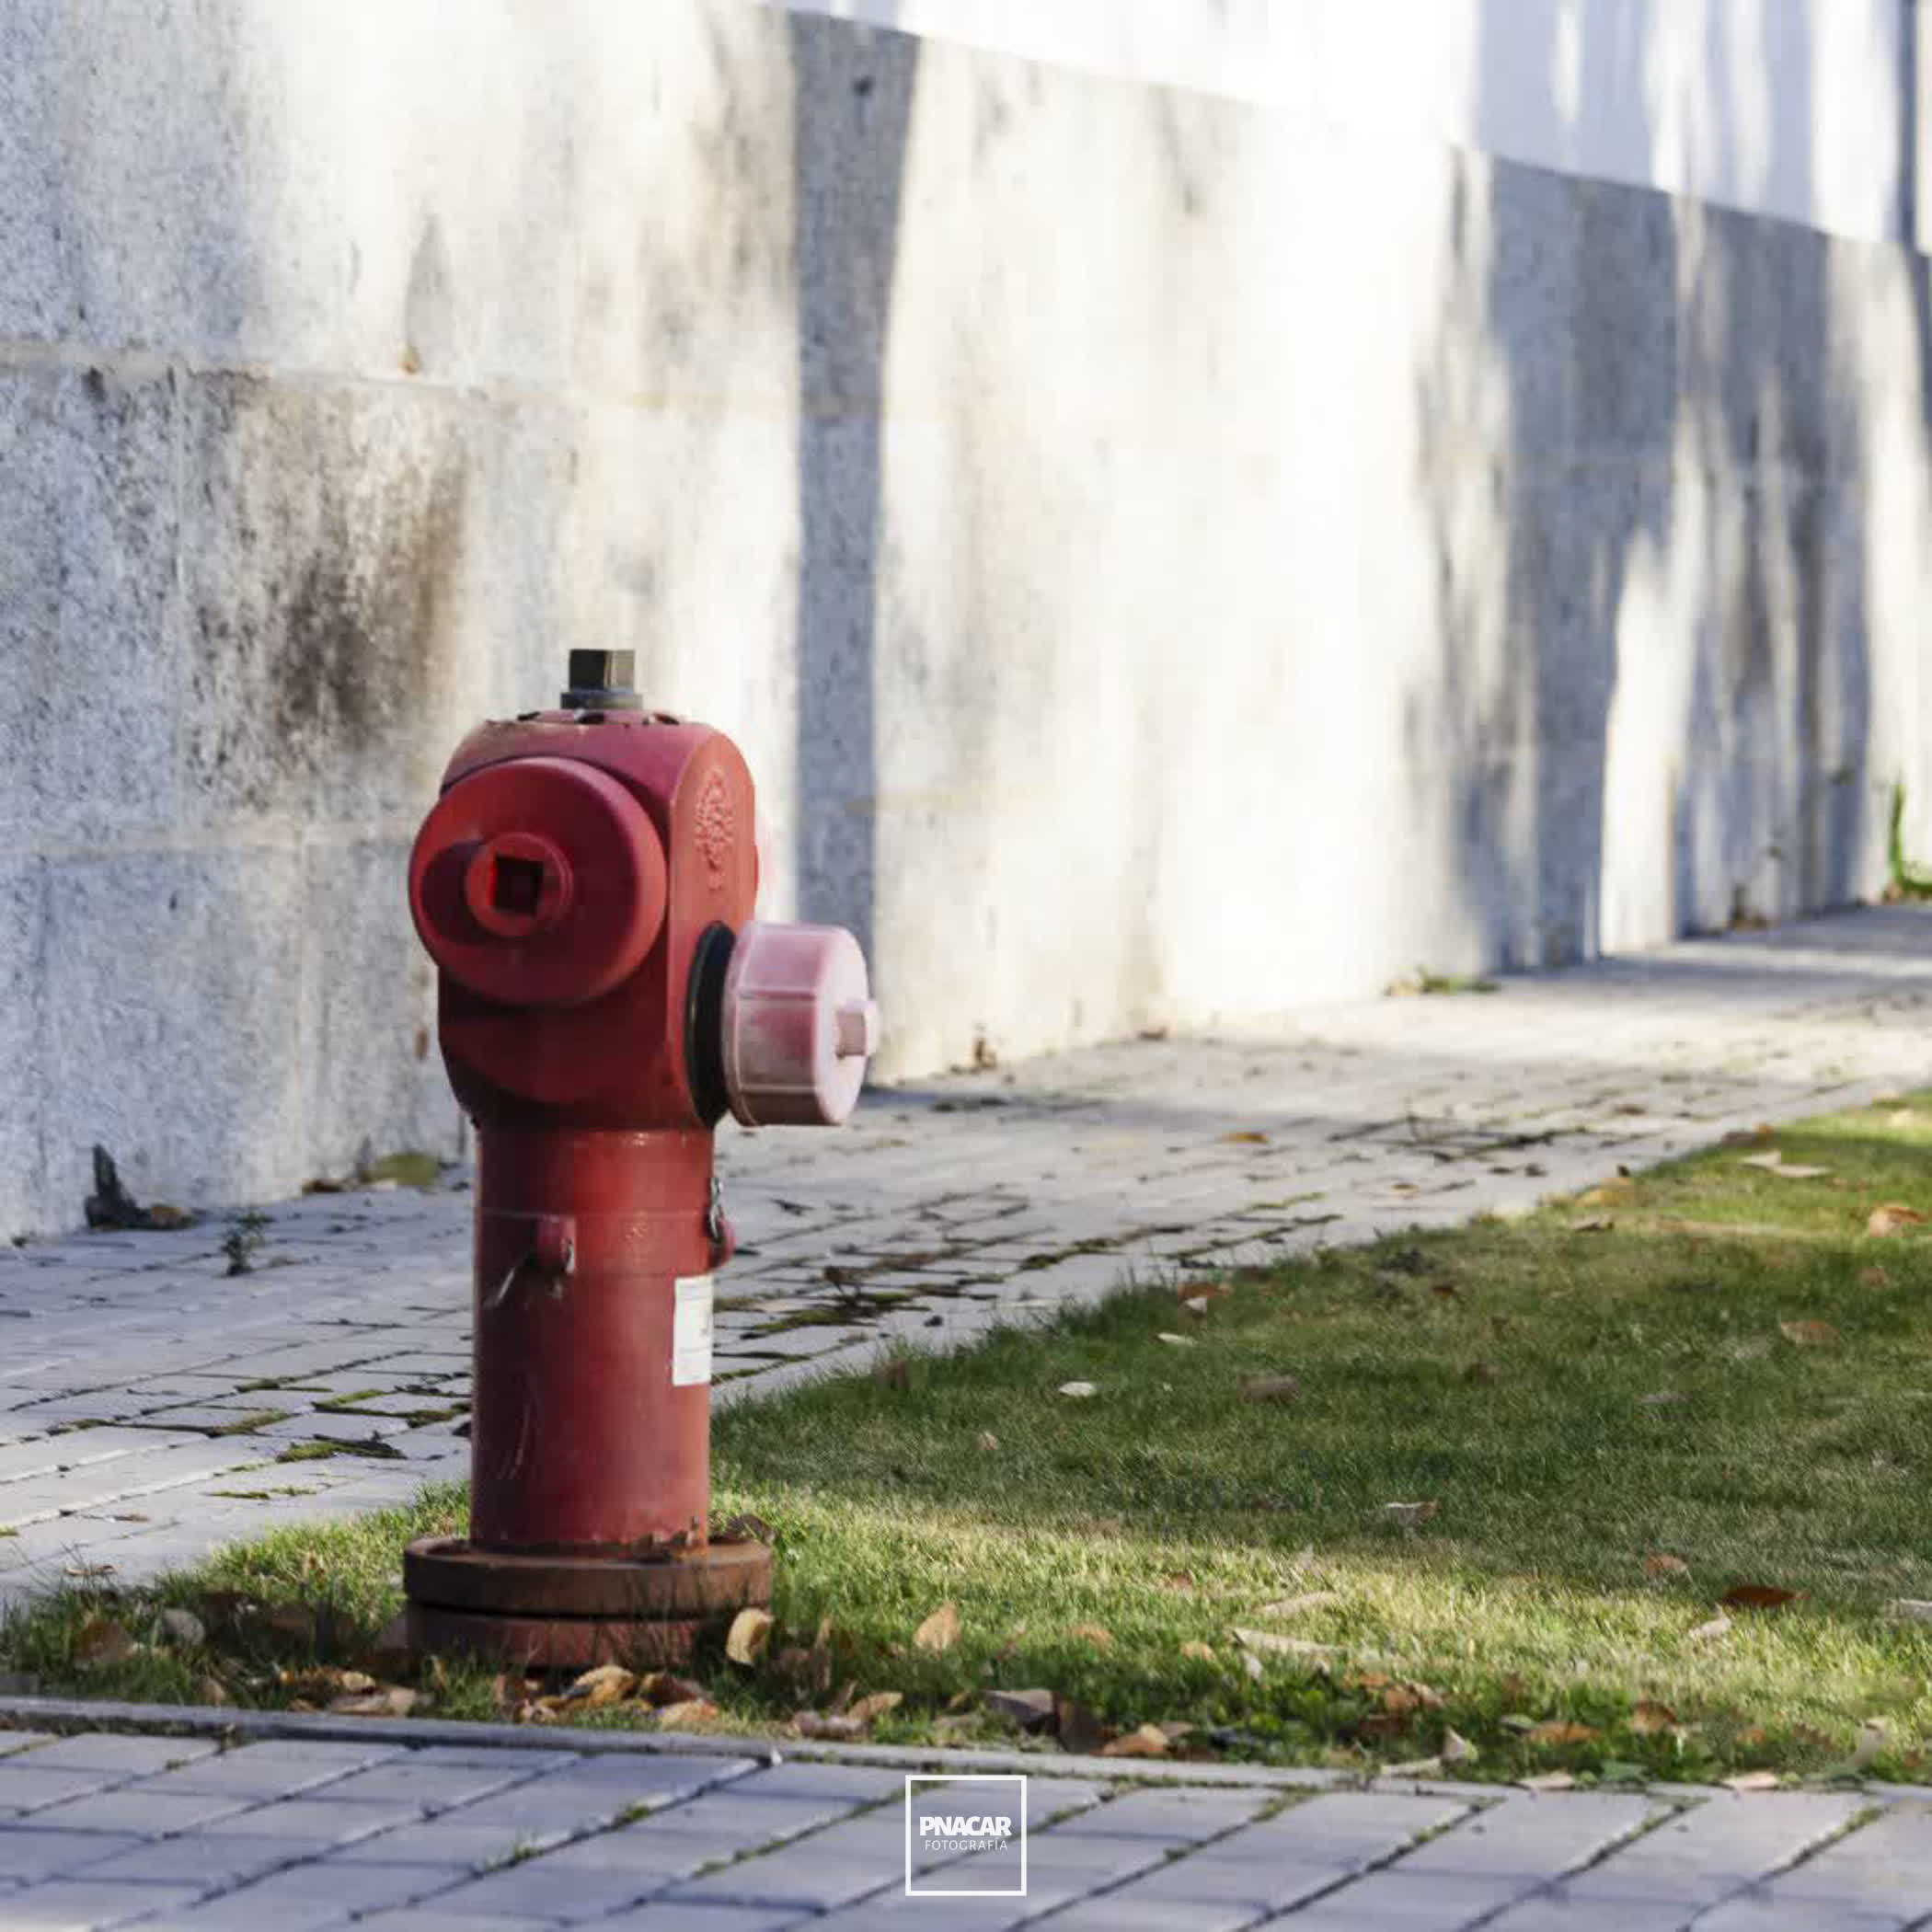 Fire hydrant on the street